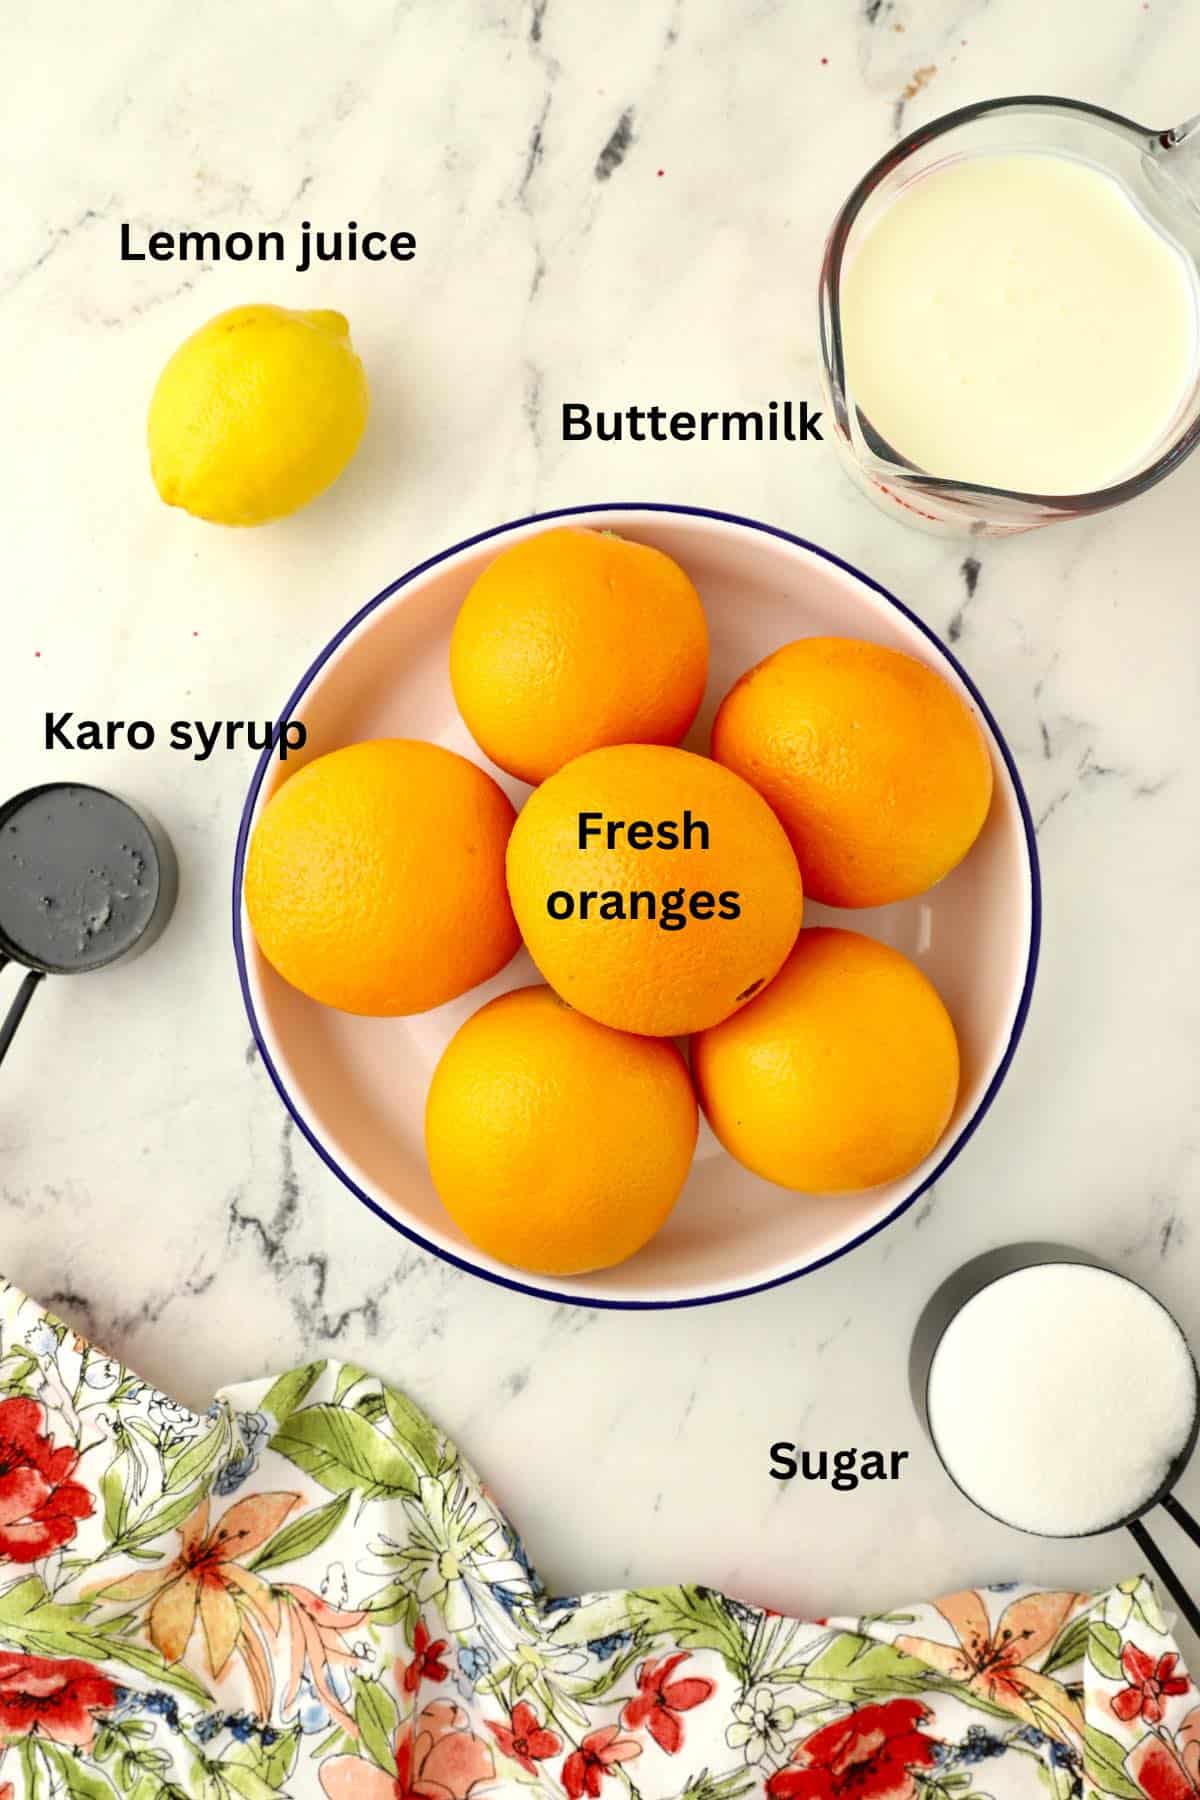 Ingredients for sherbet including oranges, buttermilk, and Karo syrup.